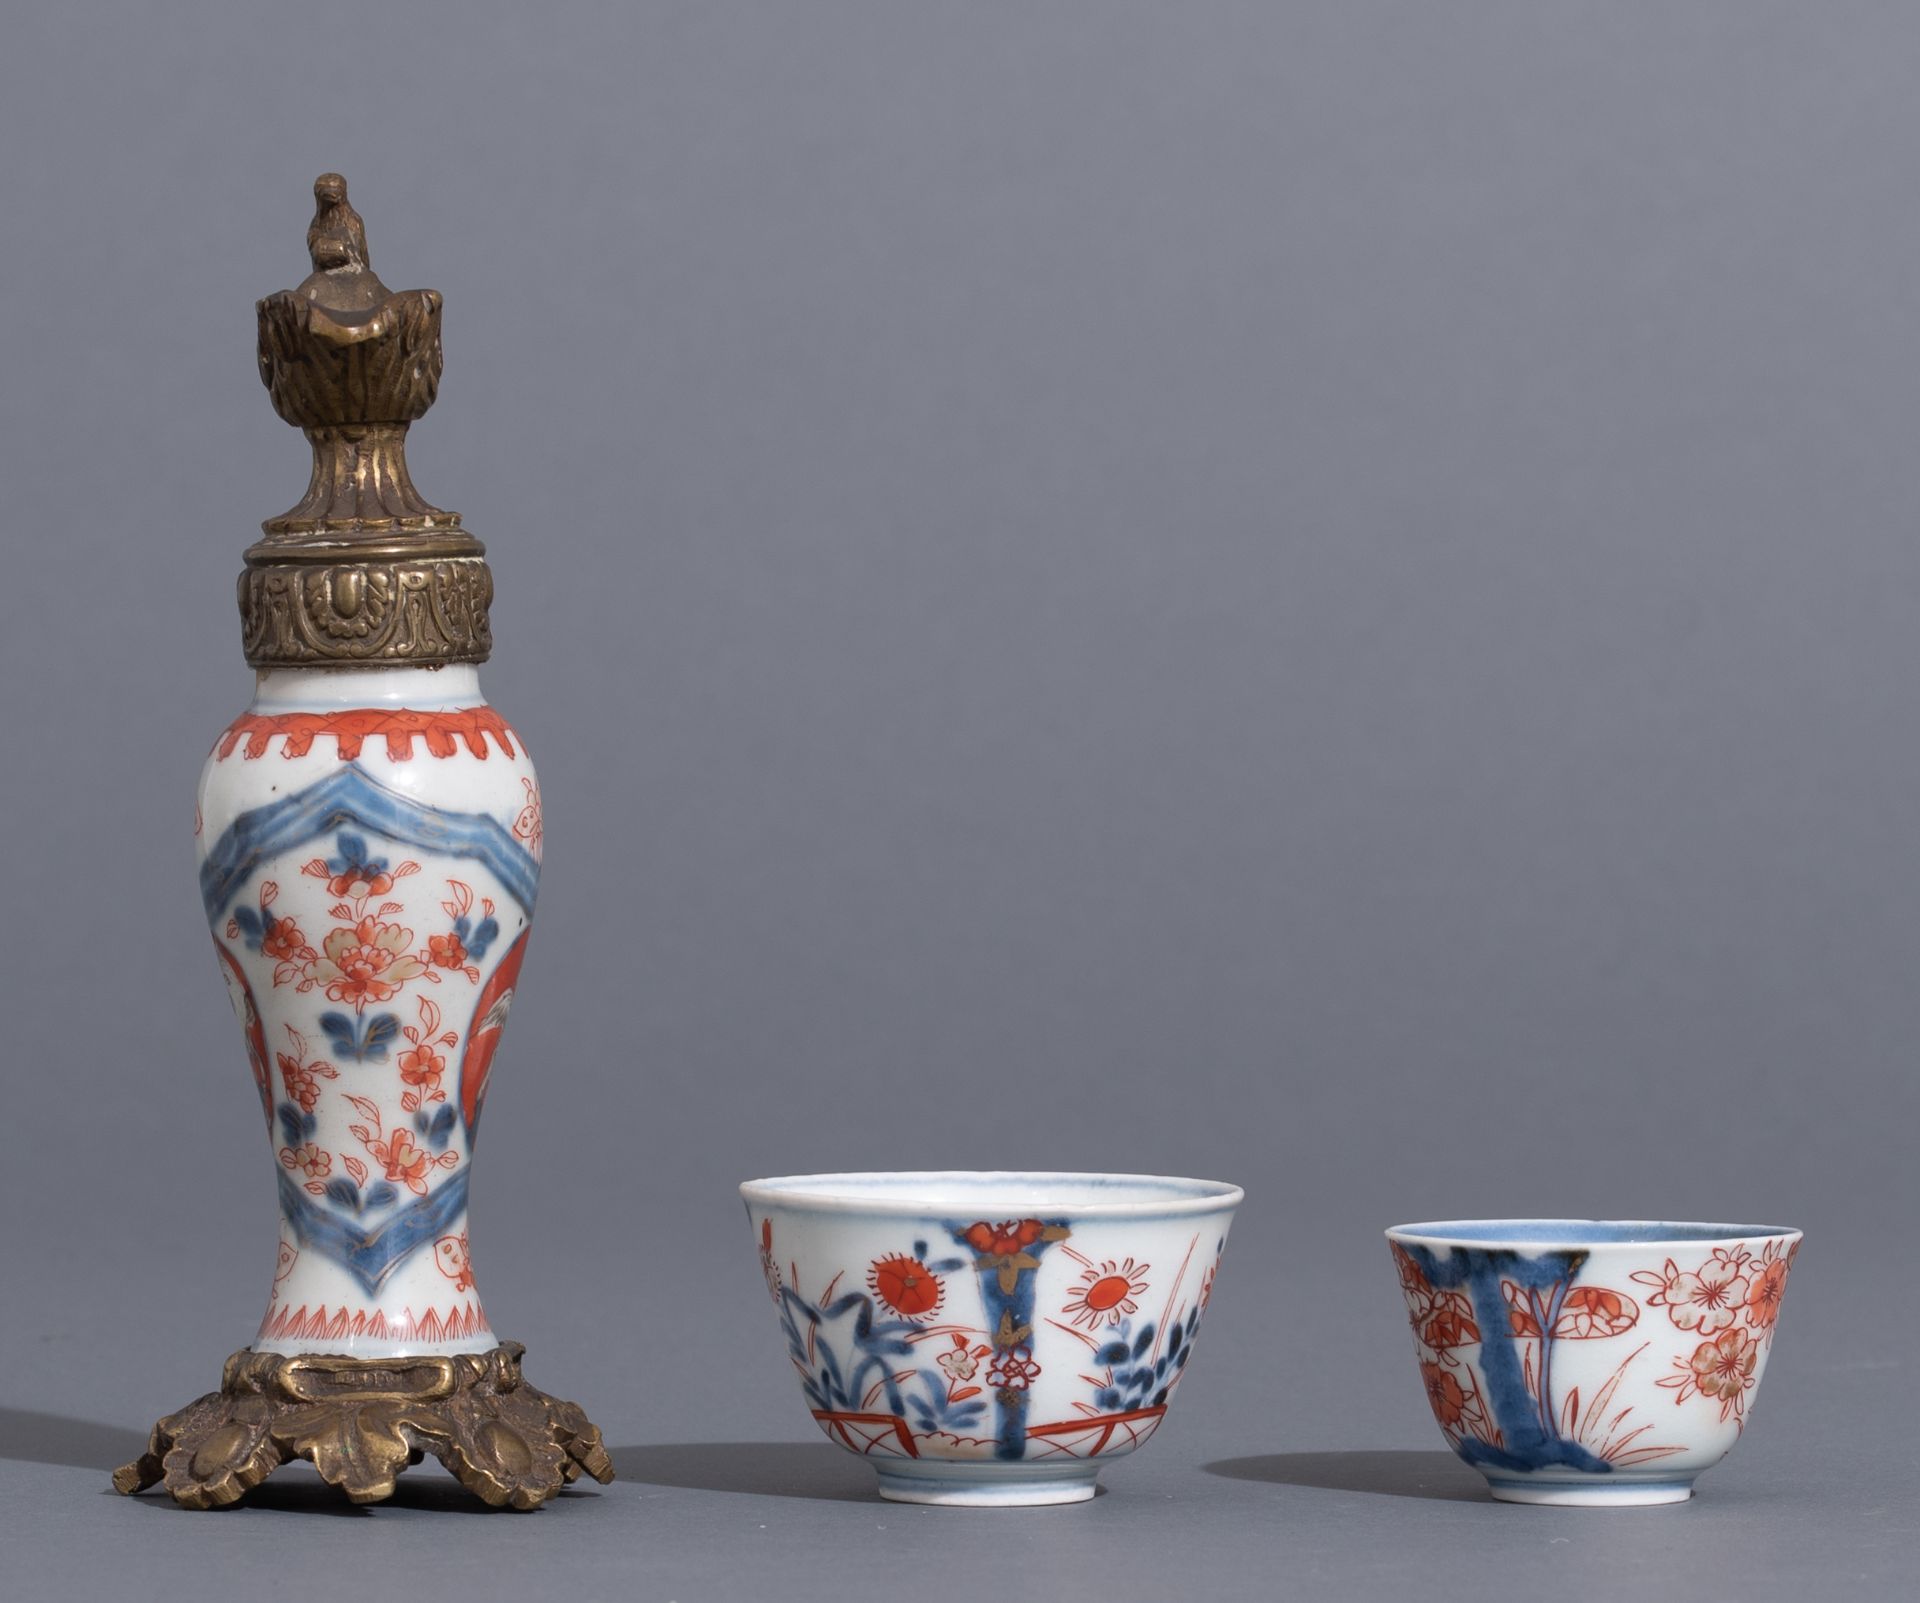 A collection of Chinese and Japanese porcelain items, 18th / 19th / 20thC, H 4 - 47 - ø 10,5 - 23 cm - Image 10 of 19